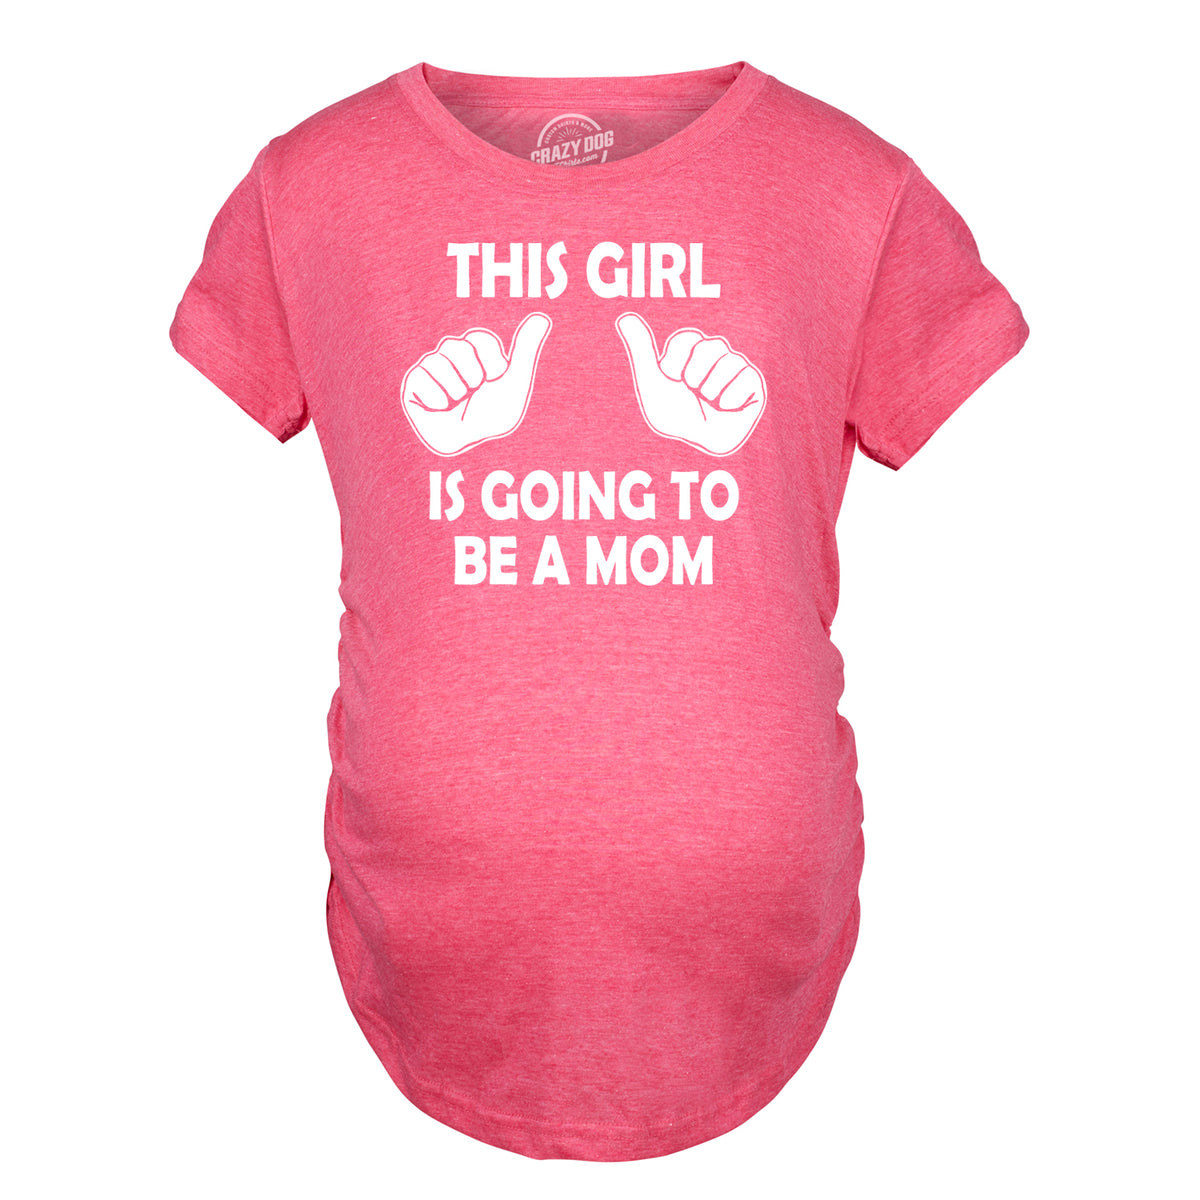 This Girl Is Going To Be A Mom Maternity T Shirt